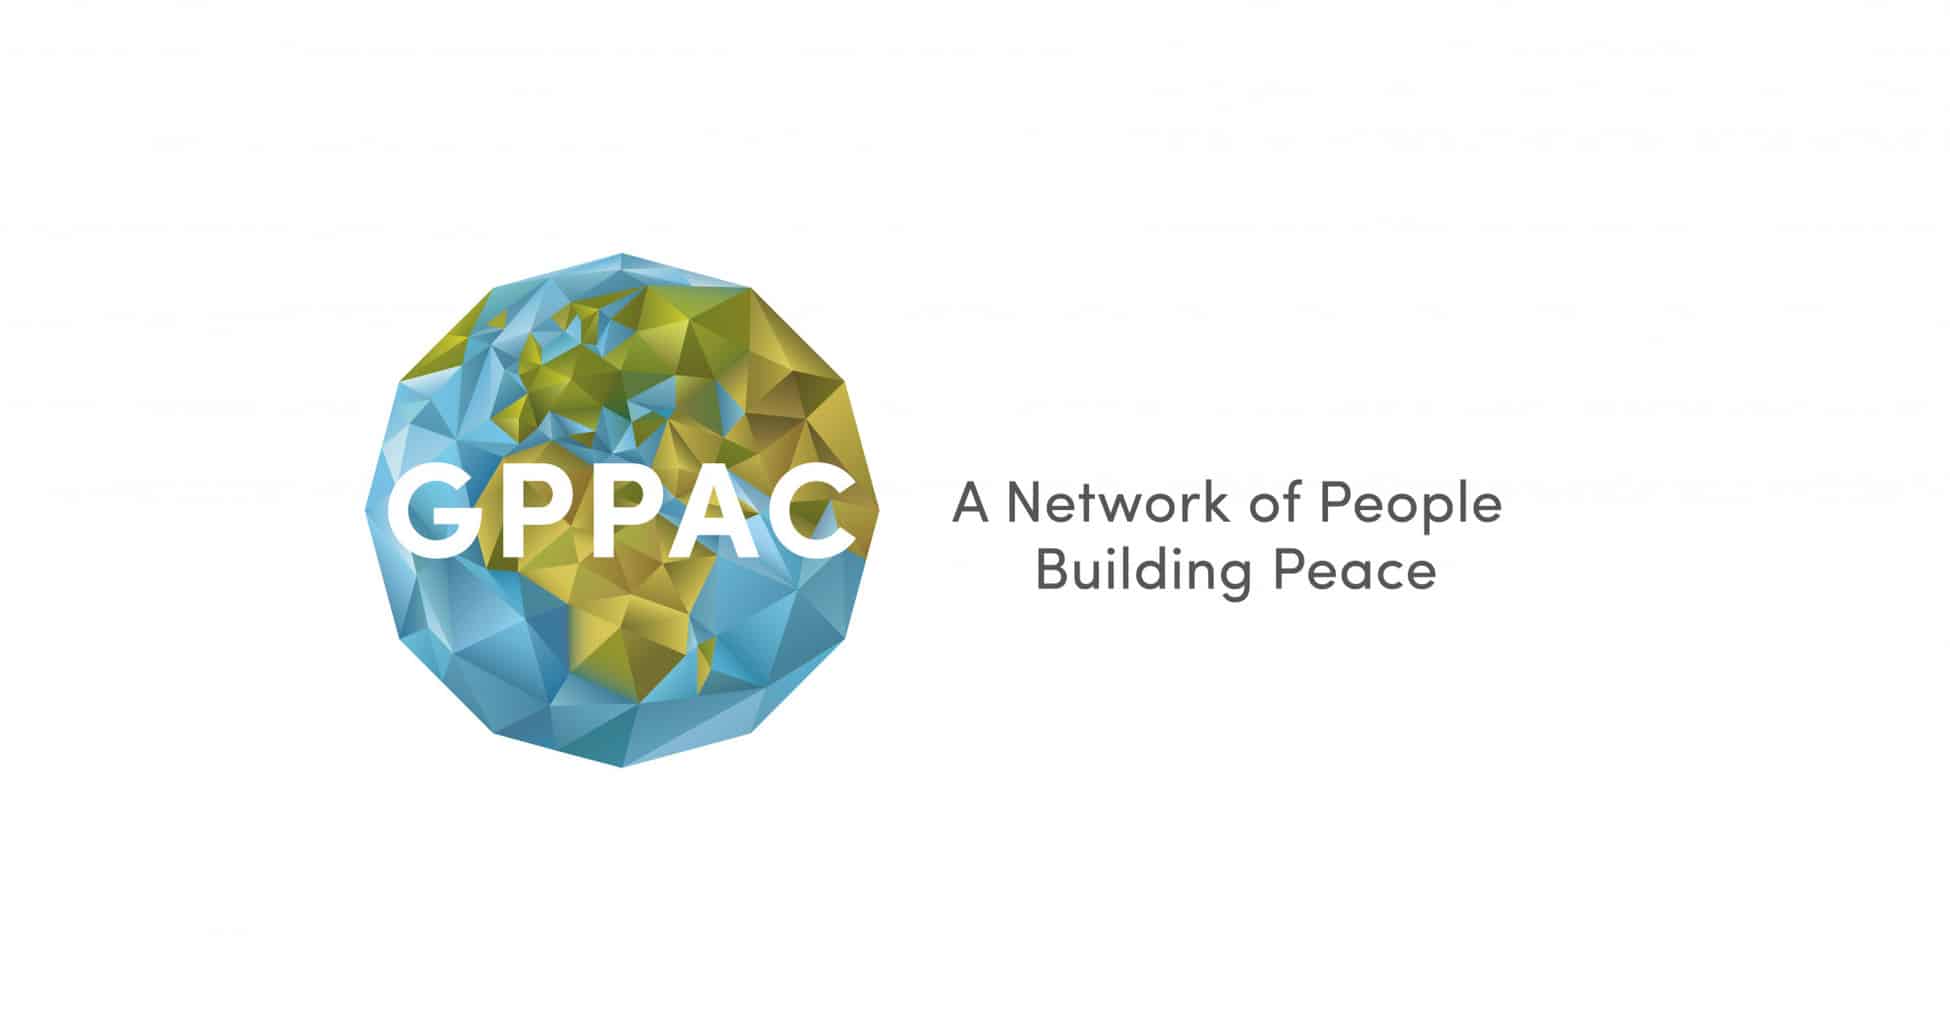 who founded global partnership for the prevention of armed conflict peace